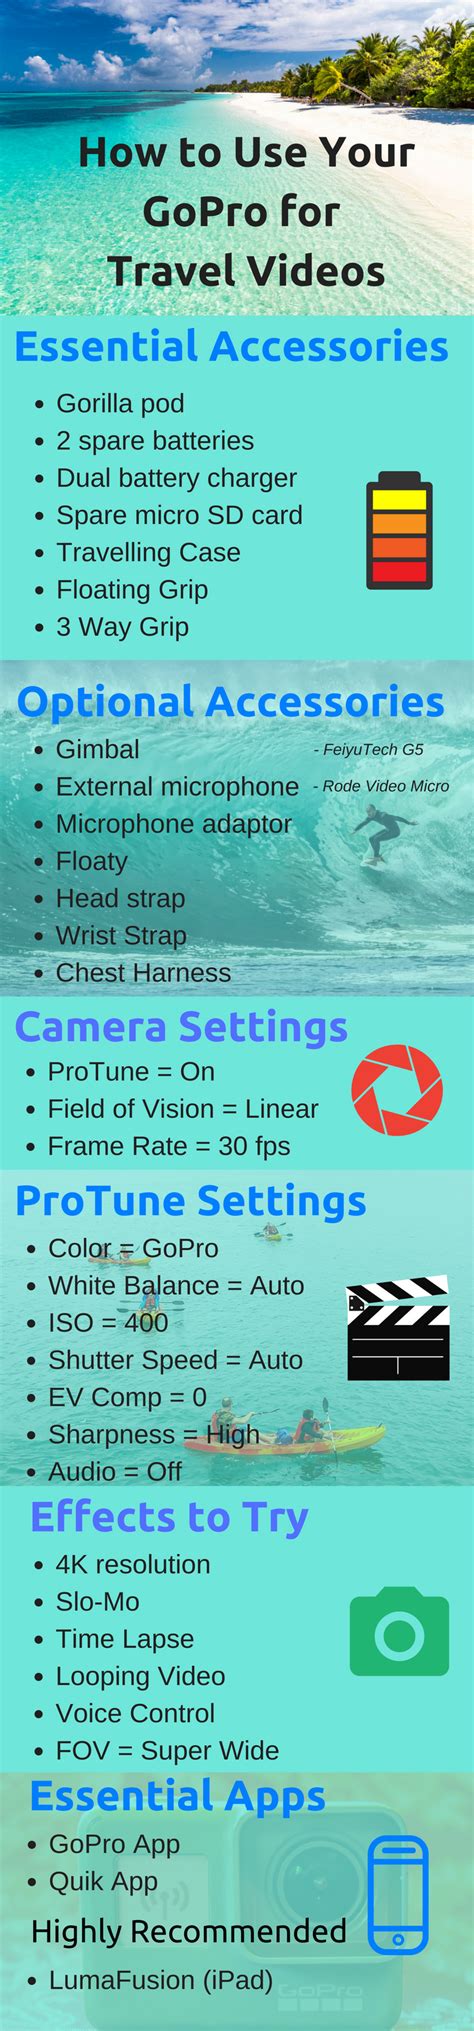 How To Use Your Gopro For Travel Videos Infographic Have You Ever